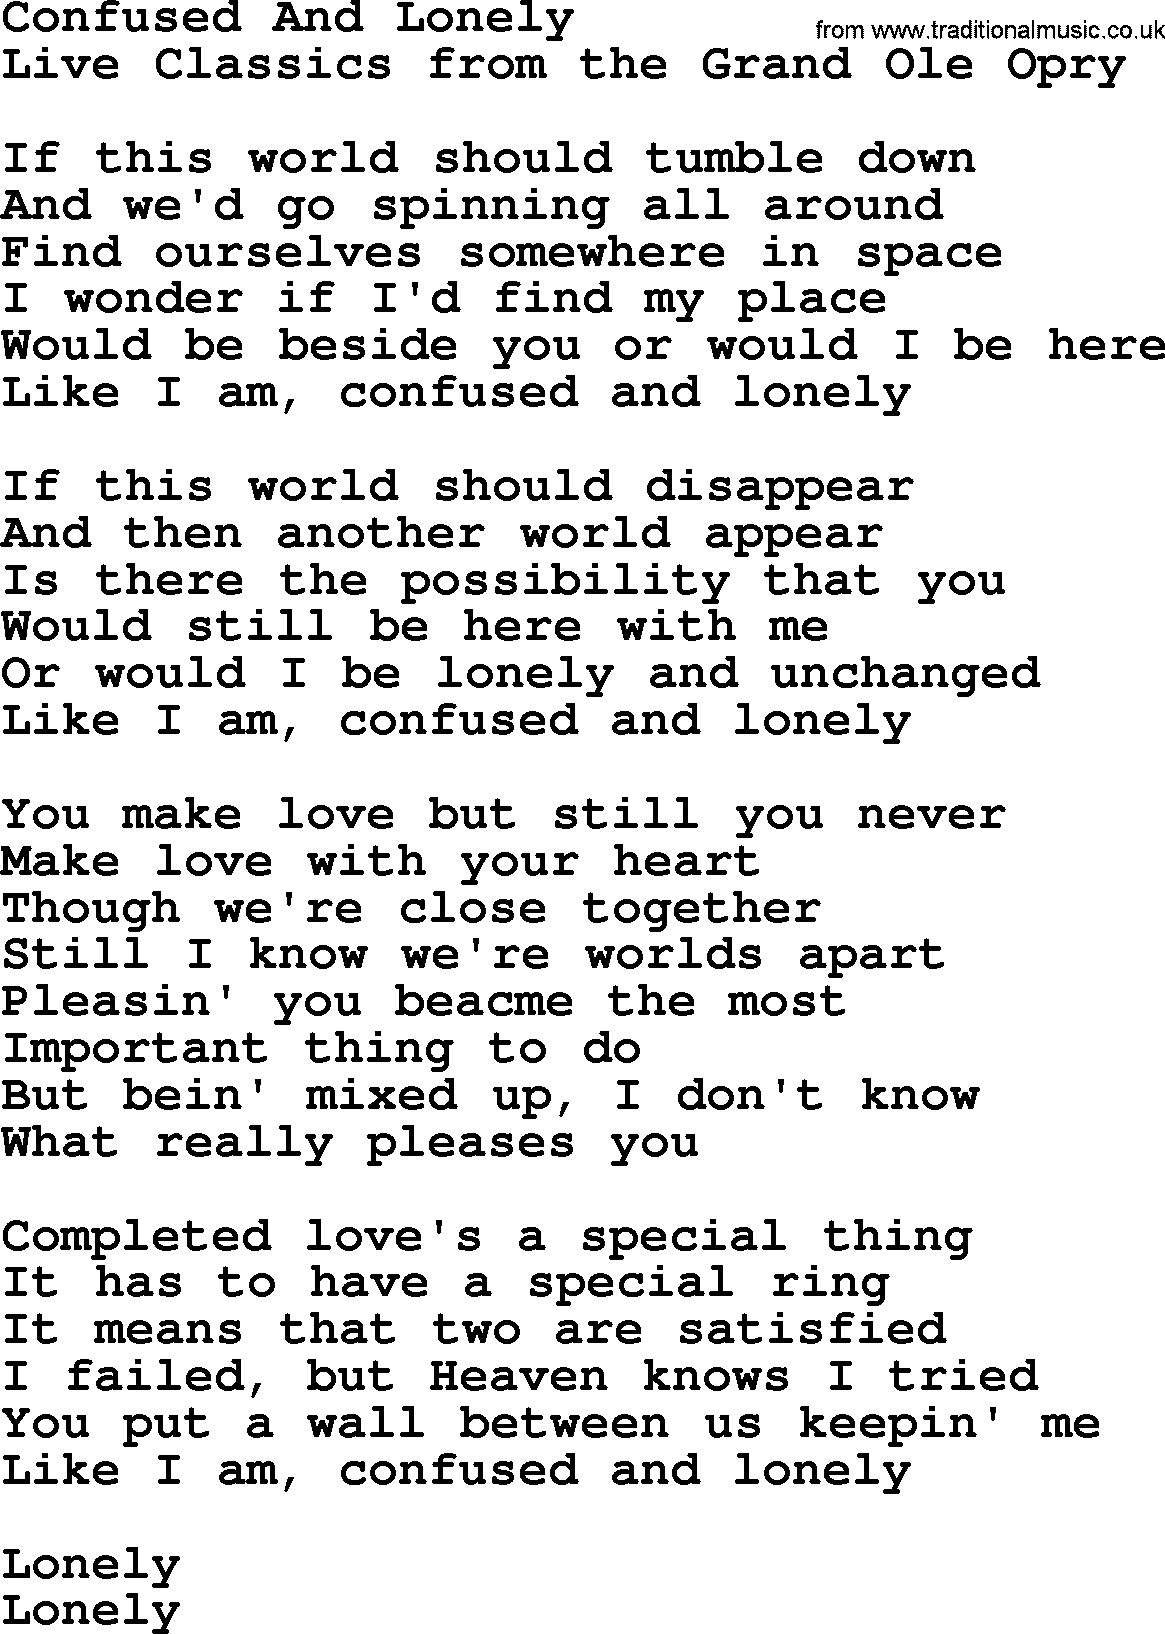 Marty Robbins song: Confused And Lonely, lyrics